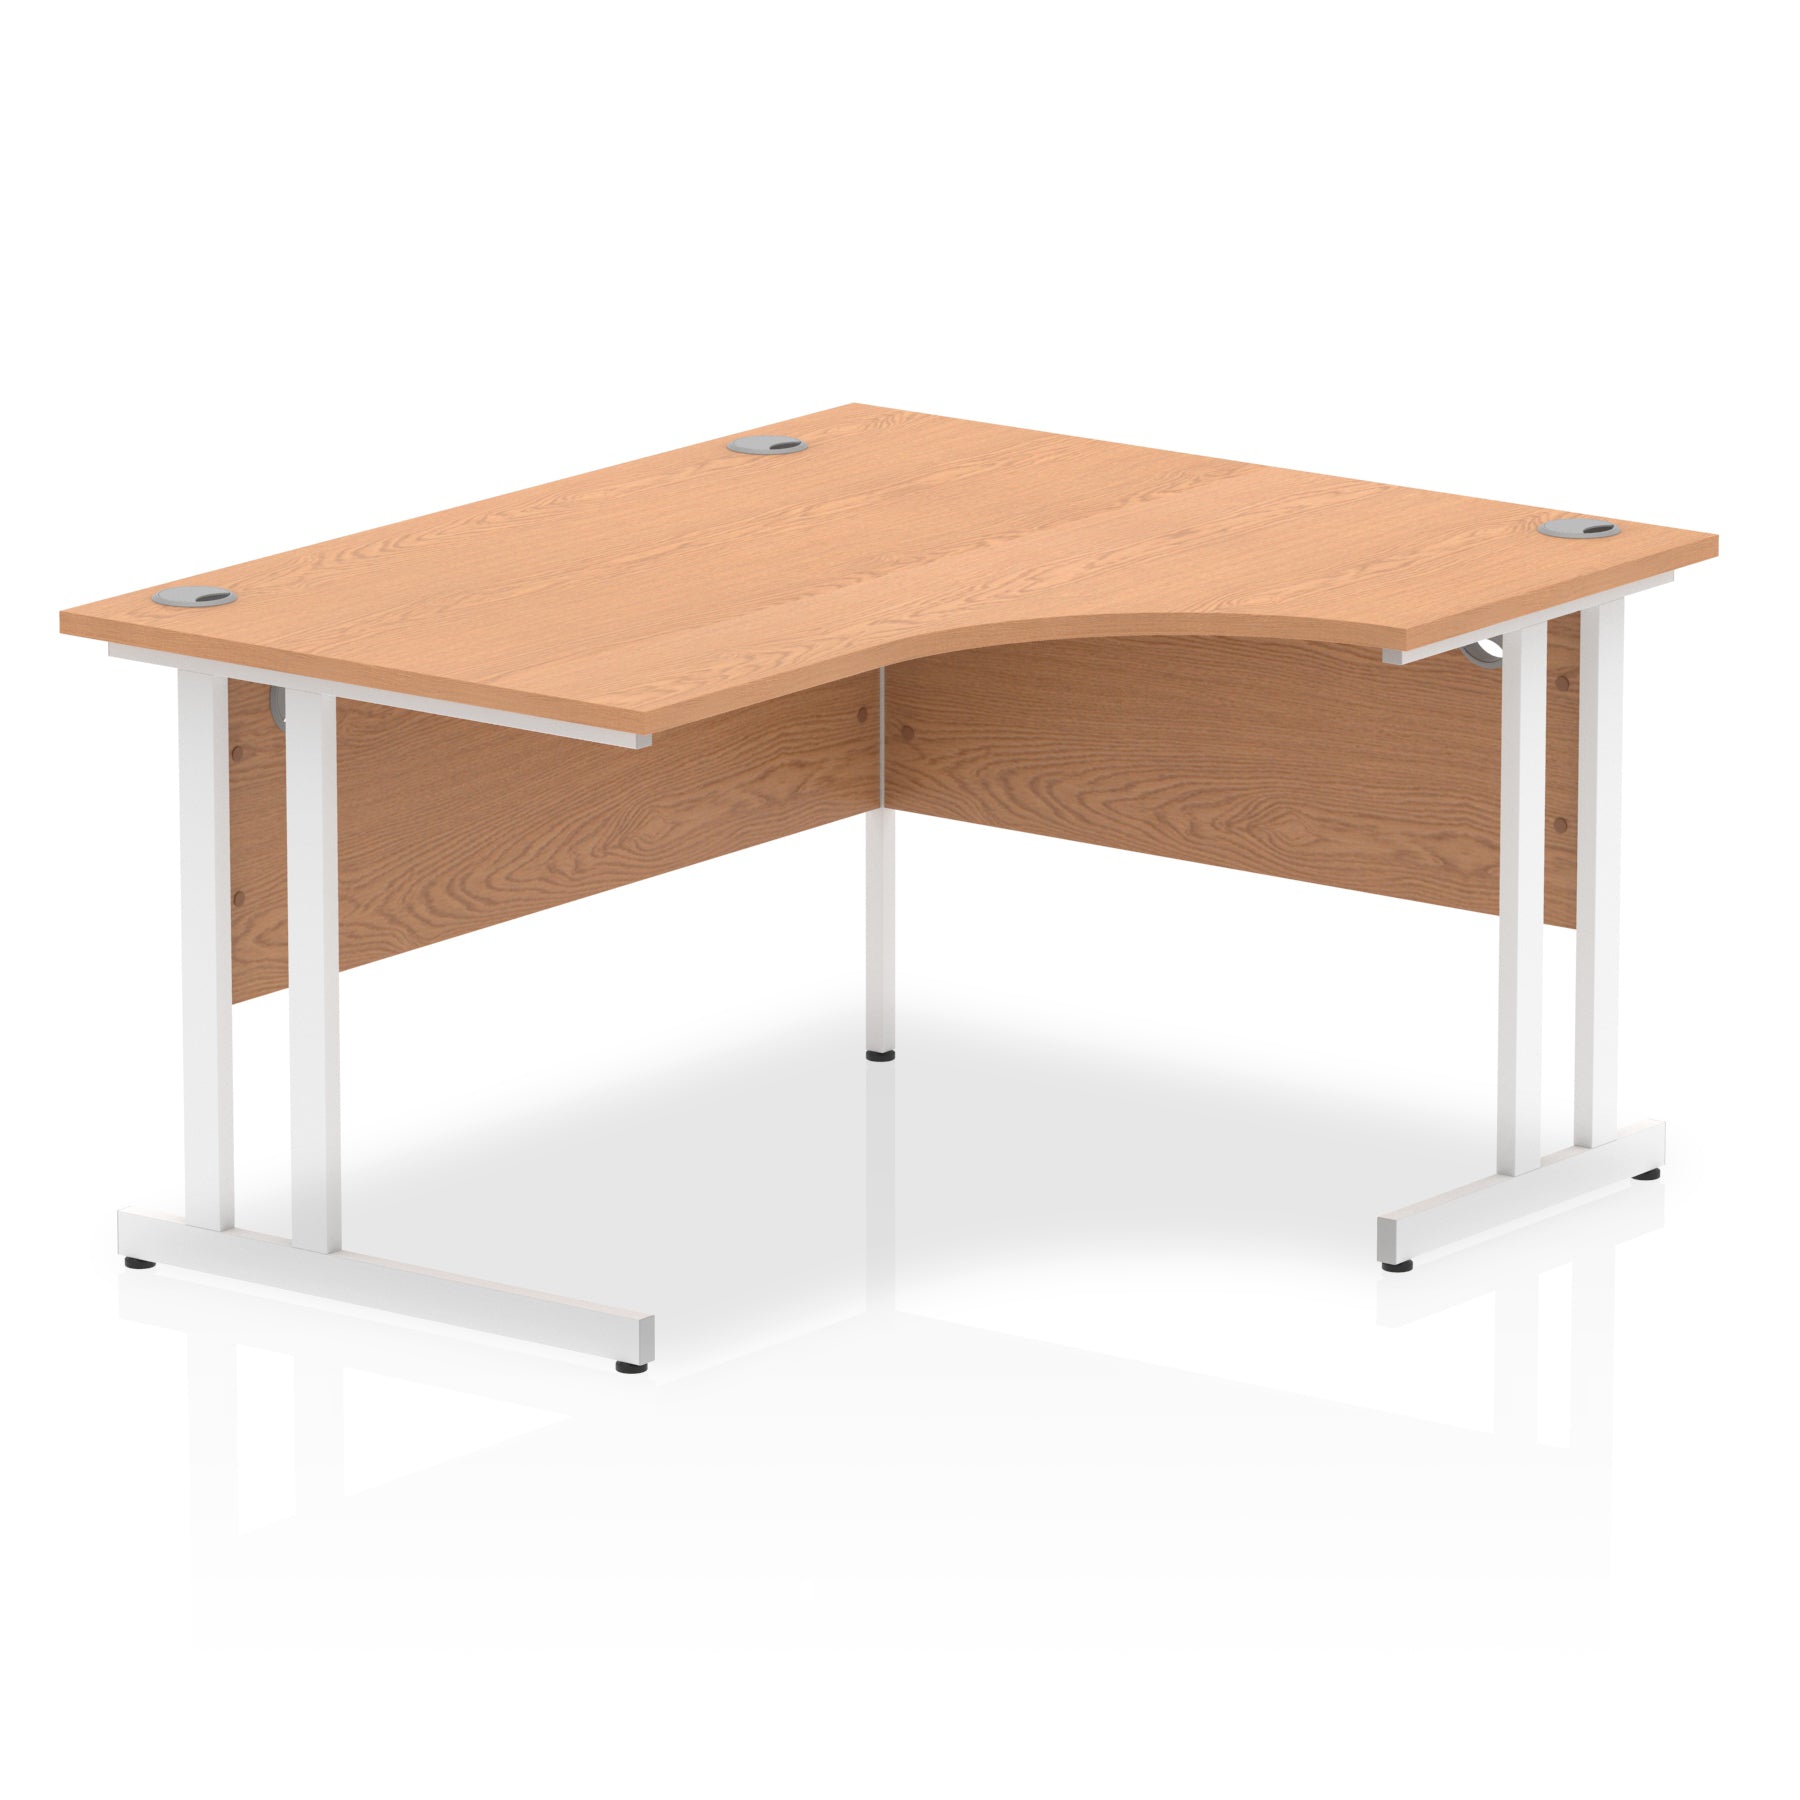 Impulse 1400mm Right Crescent Desk Cantilever Leg - MFC Material, 1400x1200 Top, Silver/White/Black Frame, 5-Year Guarantee, Self-Assembly